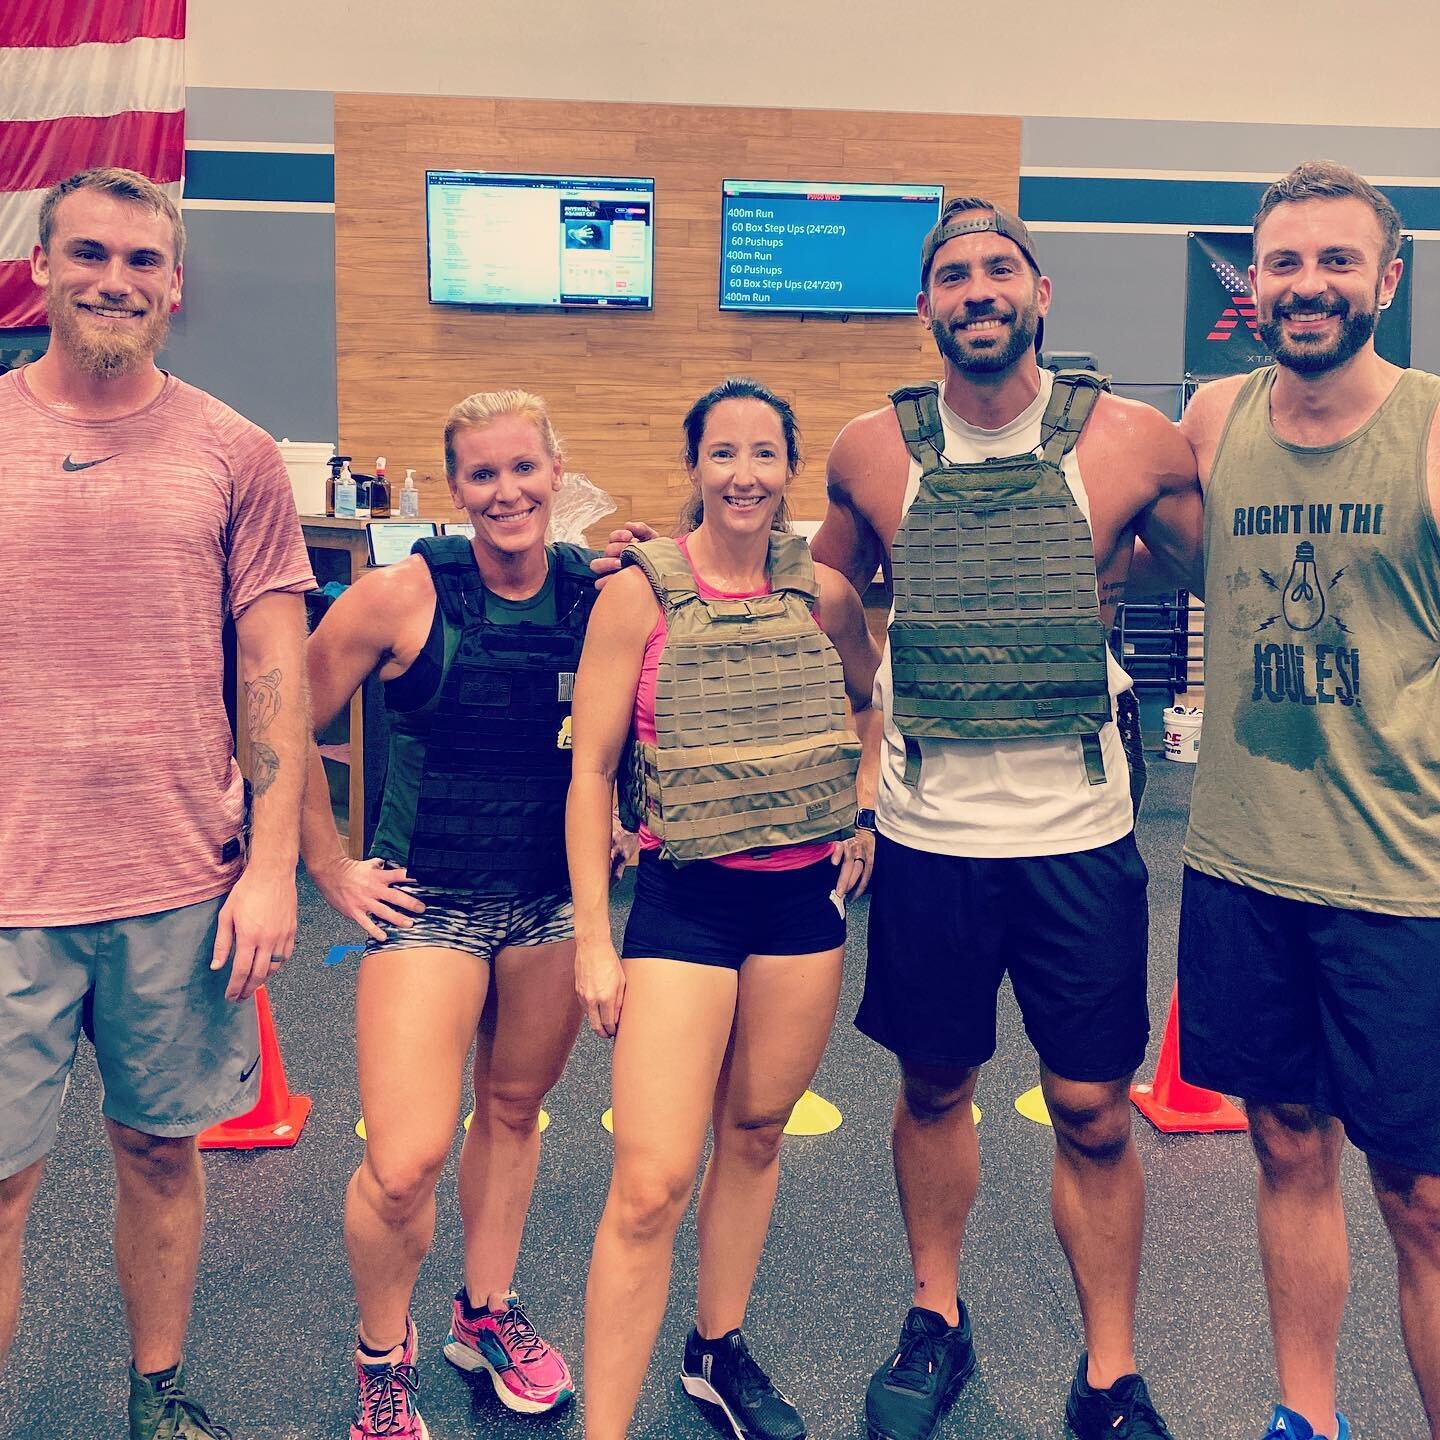 Today we, as a team, partner with Operation Underground Railroad @ourrescue to &ldquo;Get Fit, Save Kids.&rdquo; This WOD is more than calories burned. It&rsquo;s more than a PR. It&rsquo;s more than throwing around weights and barbells. It&rsquo;s a